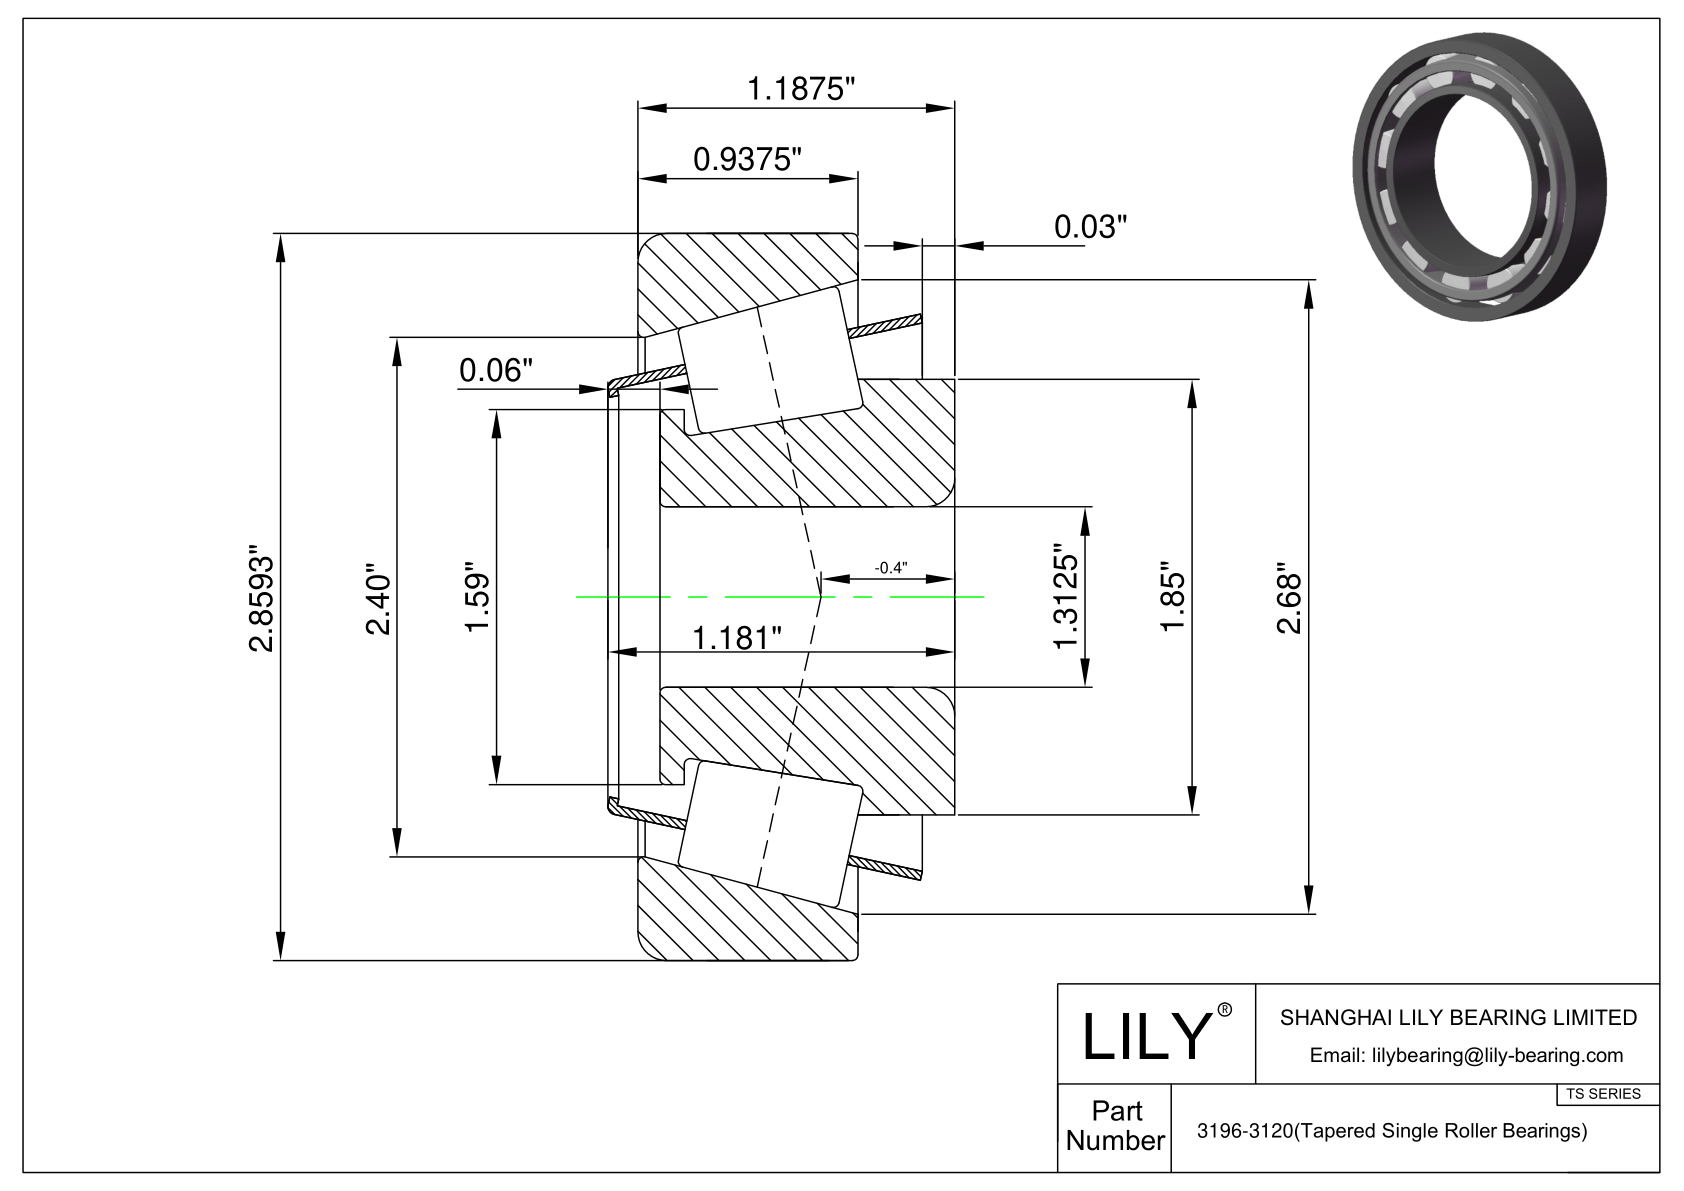 3196-3120 TS (Tapered Single Roller Bearings) (Imperial) cad drawing